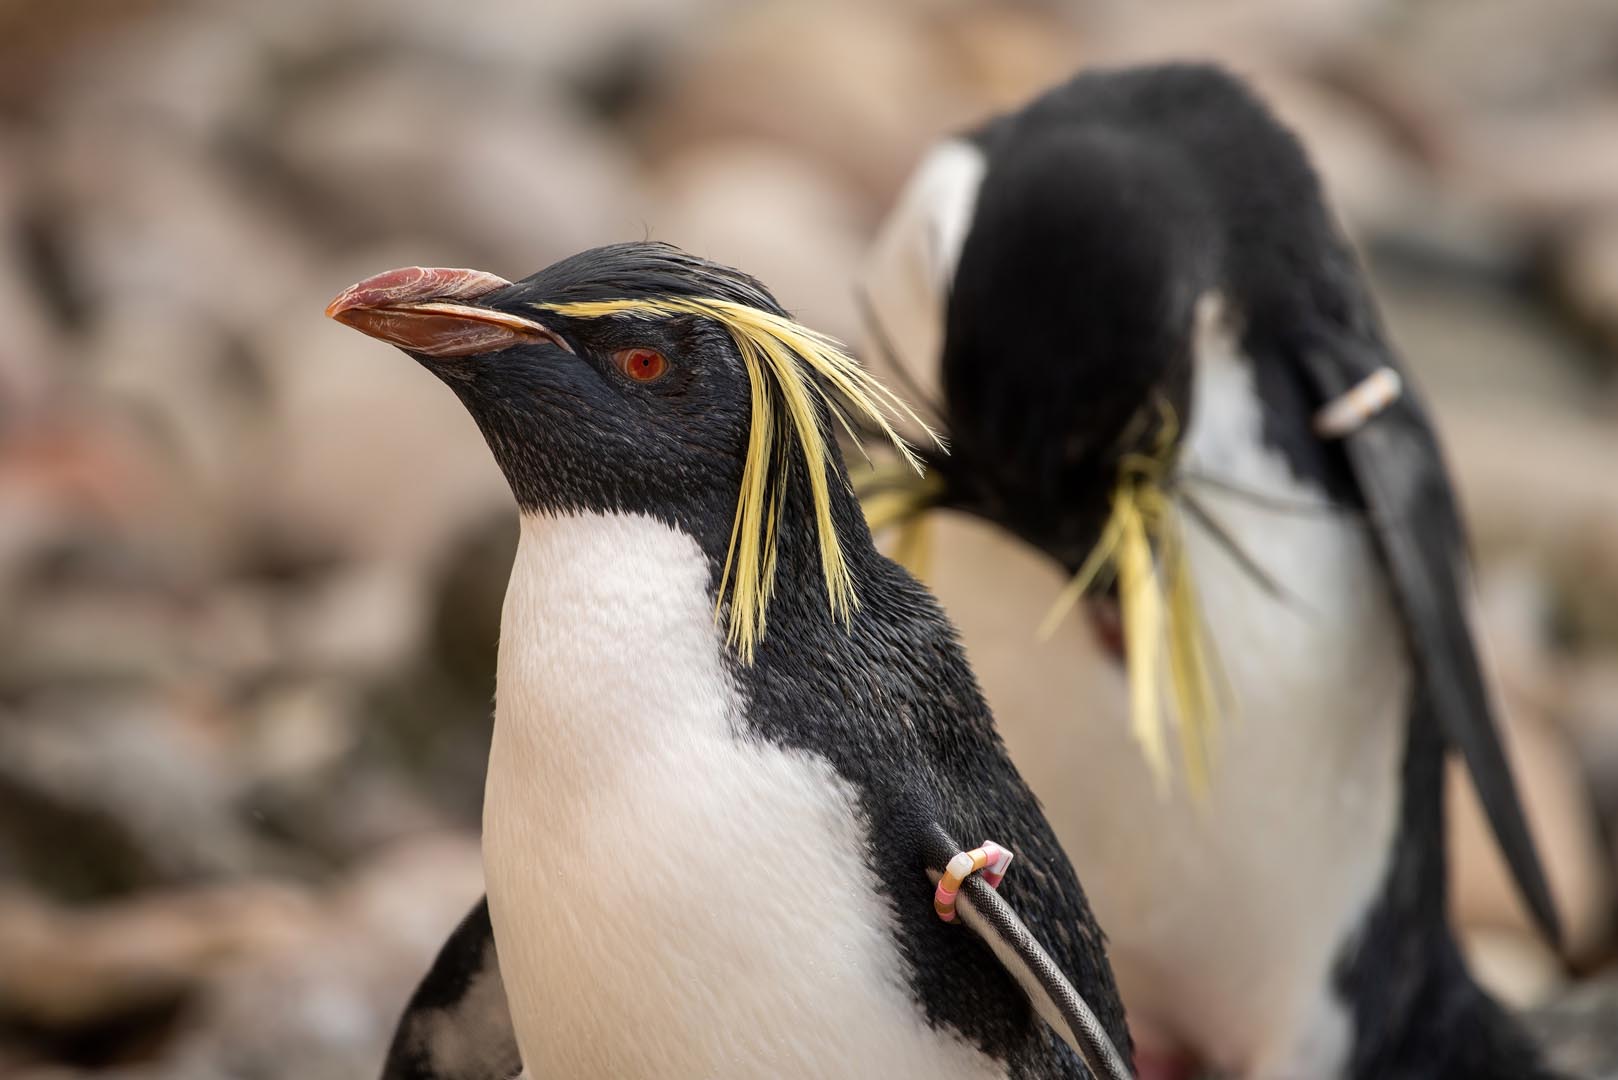 Two Northern rockhopper penguins, one making eye contact IMAGE: Amy Middleton 2023